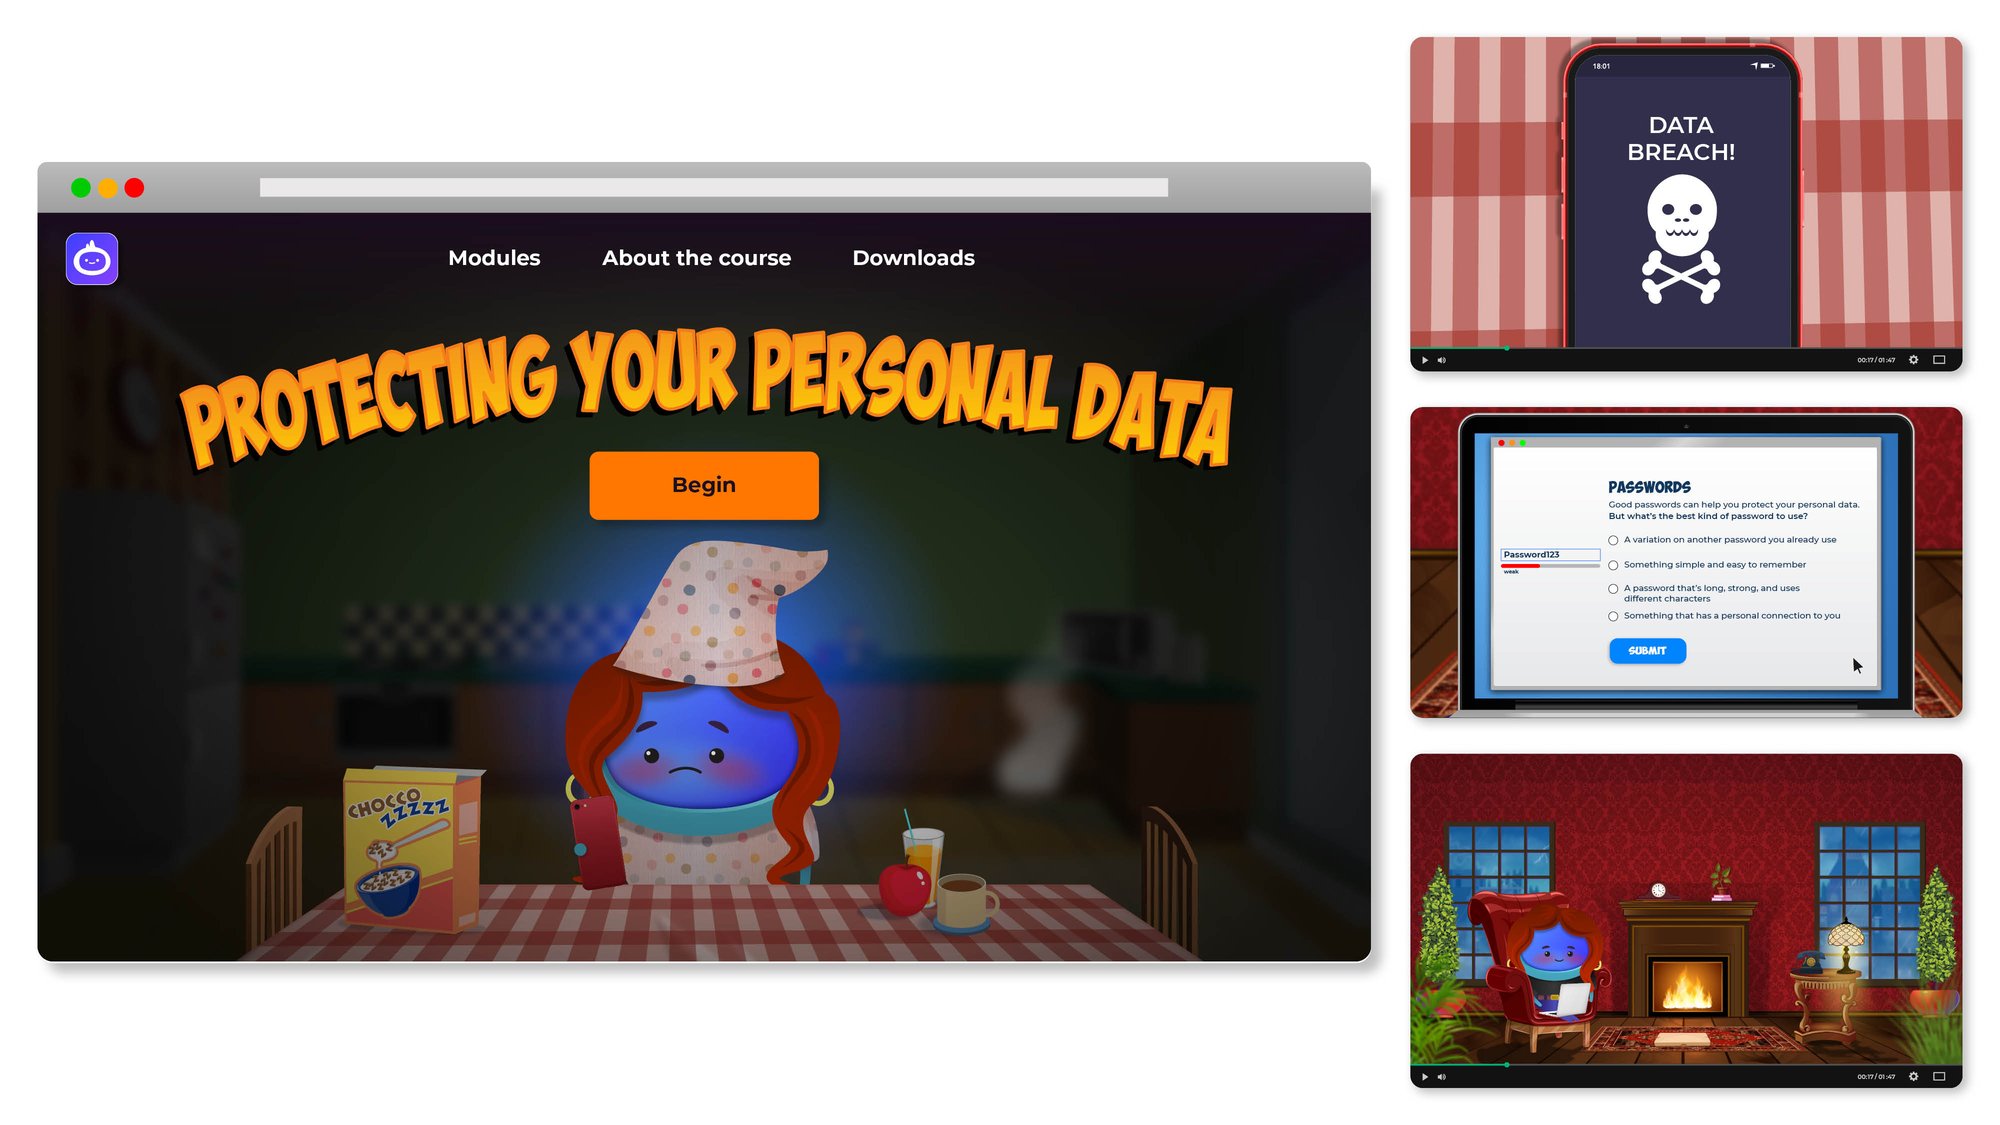 iAM 00302 - Protecting Your Personal Data - Landing Page